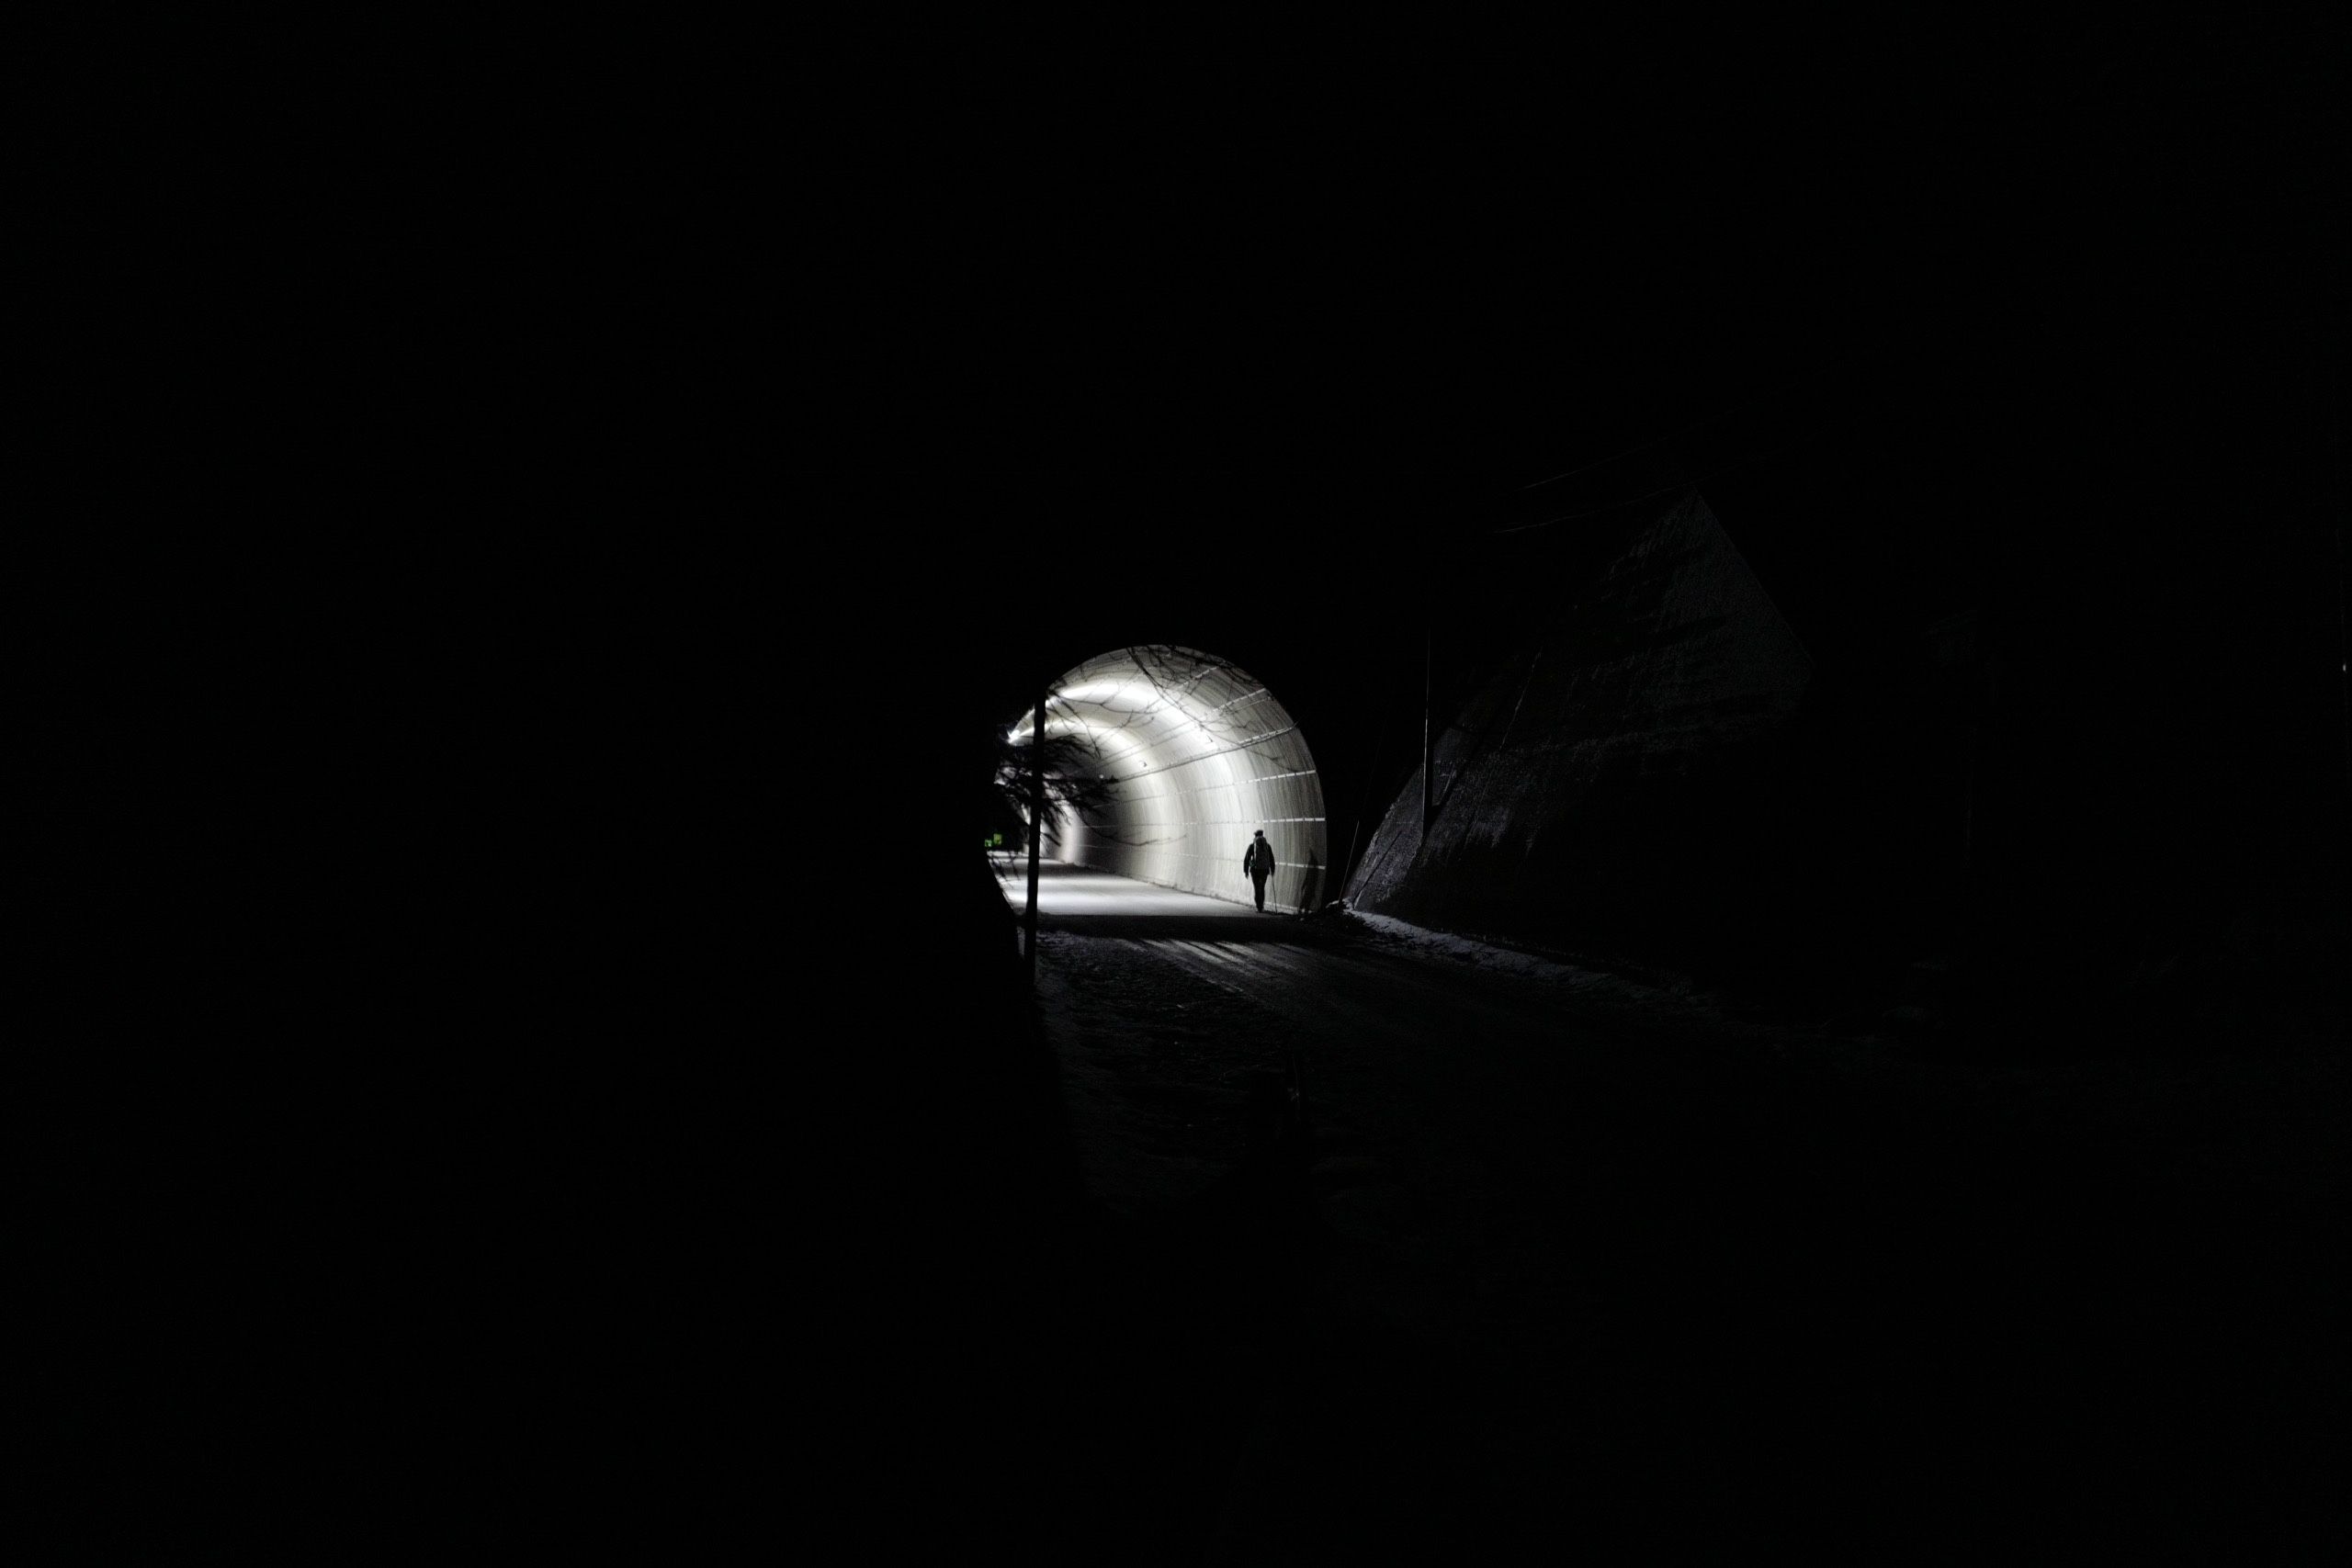 In the distance, a man walks into a tunnel in otherwise complete darkness.